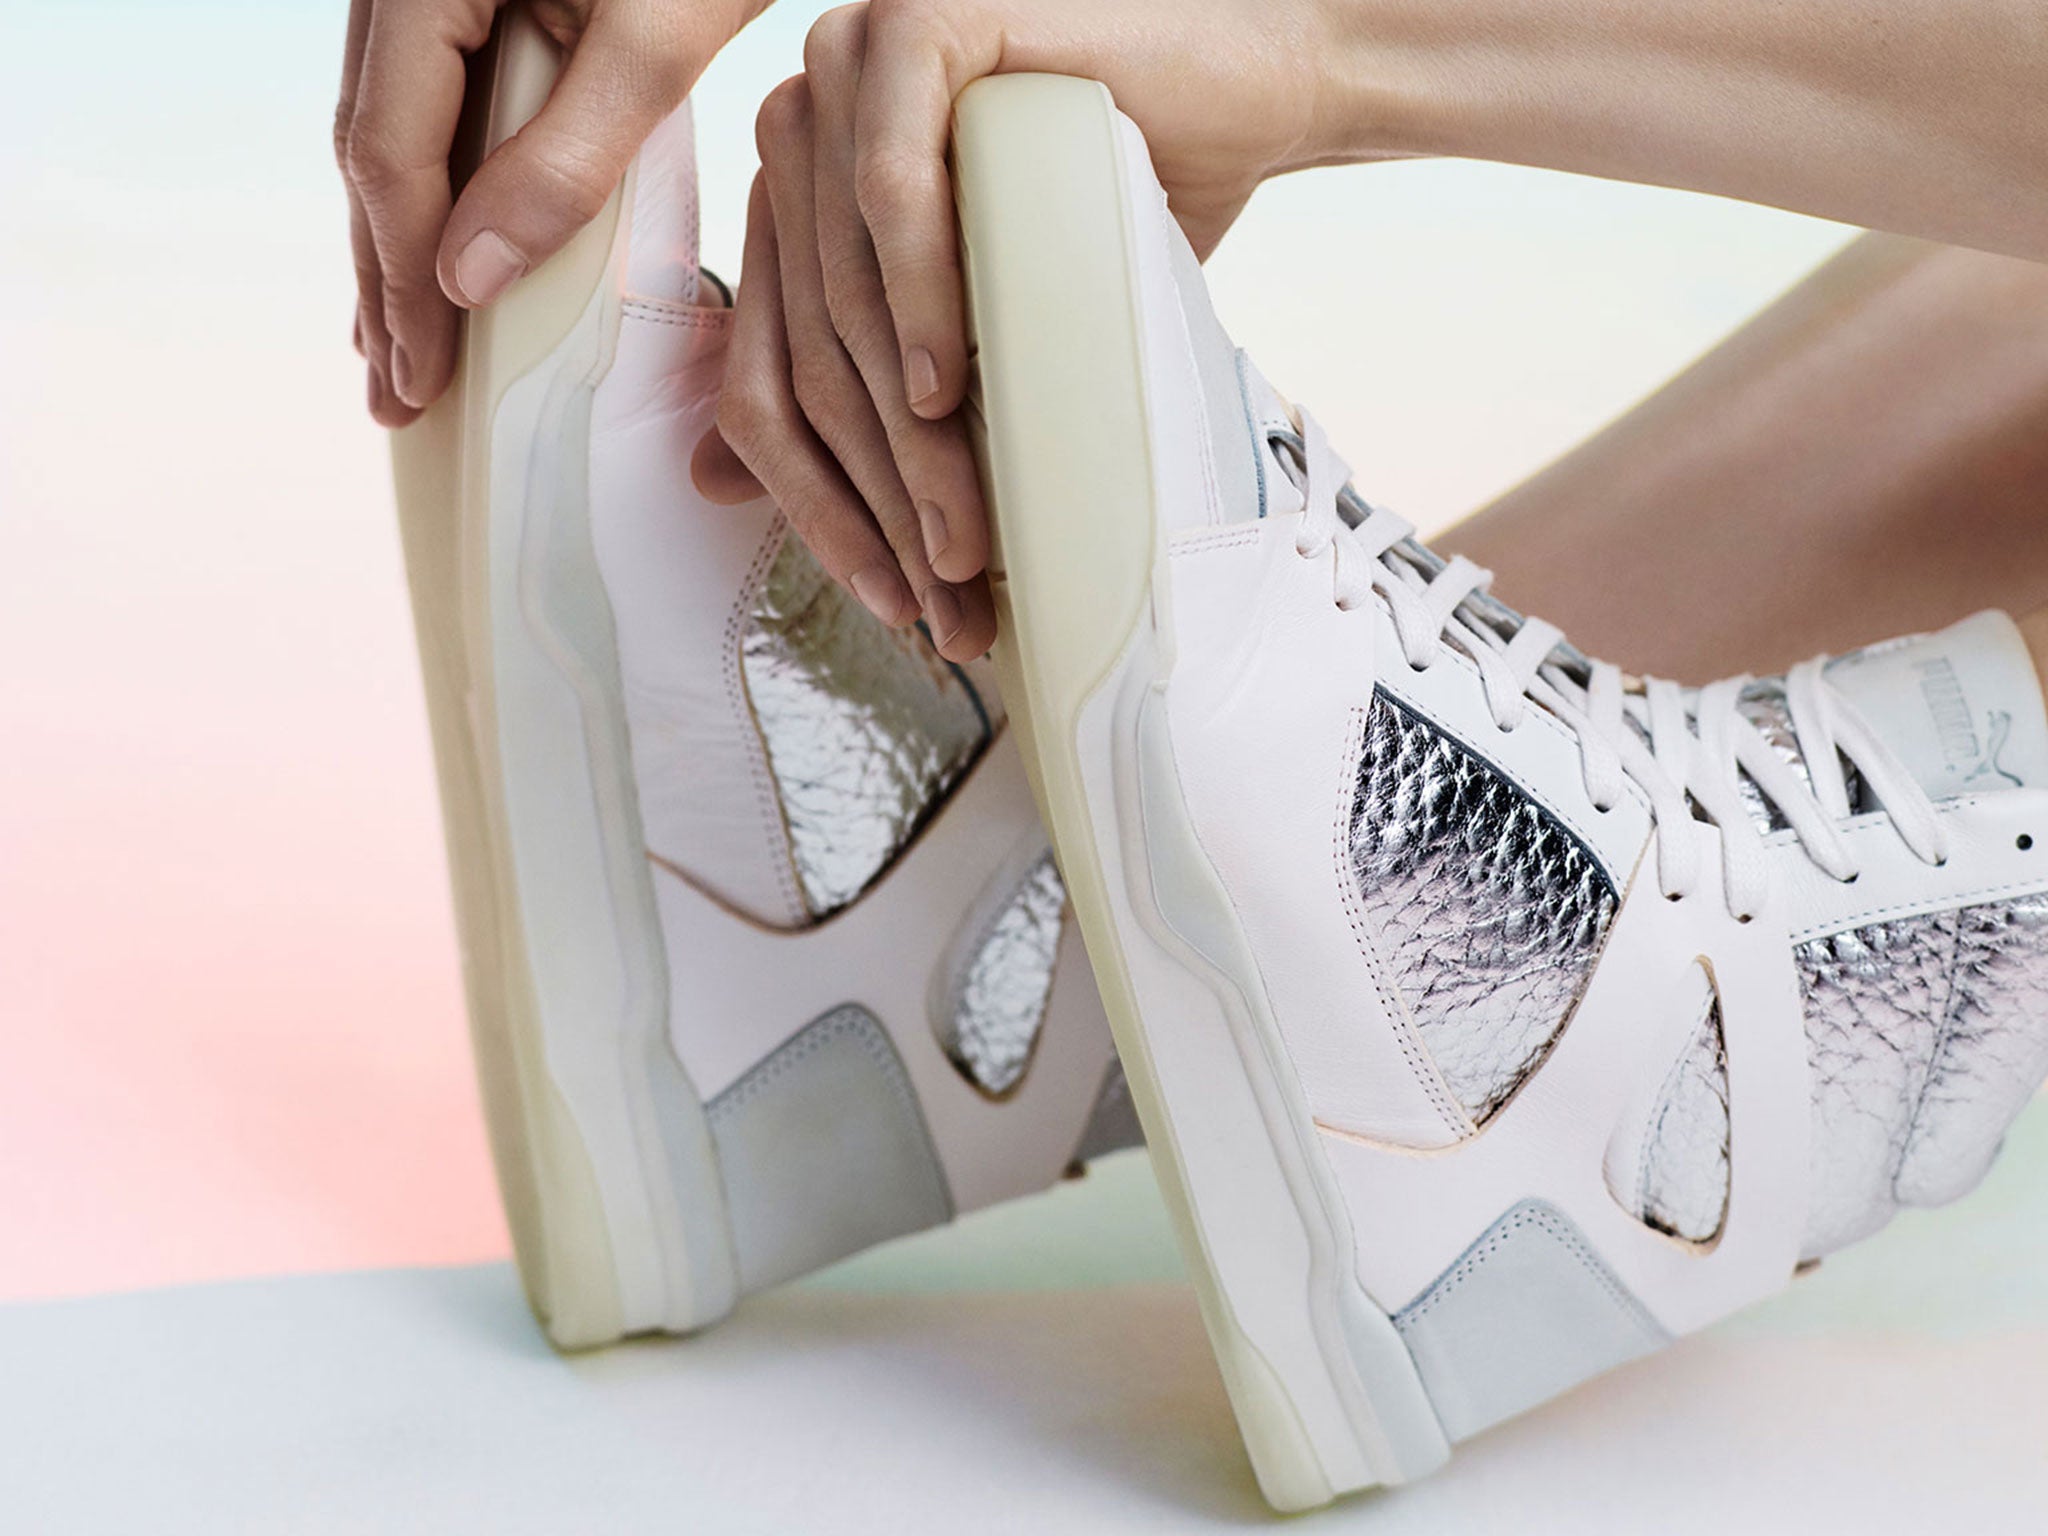 PUMA and McQ spring/summer 2015 collection